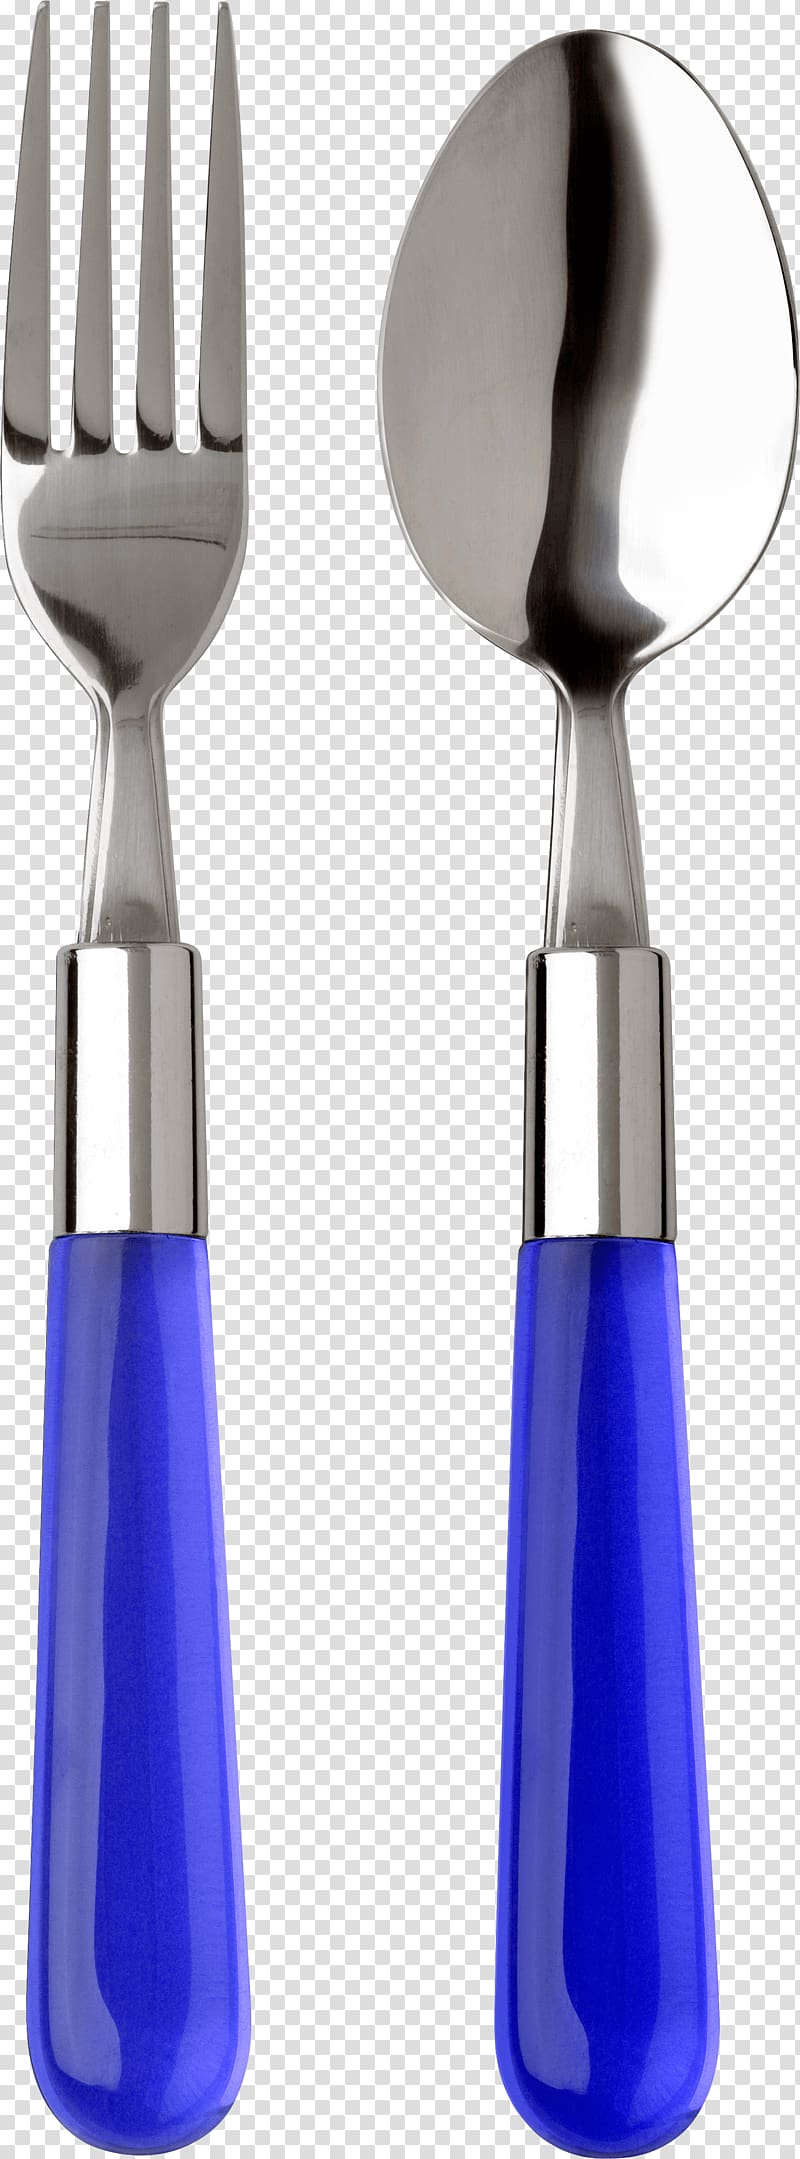 blue handled grey steel spoon and fork, Knife Fork Spork Spoon, Fork And Spoon transparent background PNG clipart